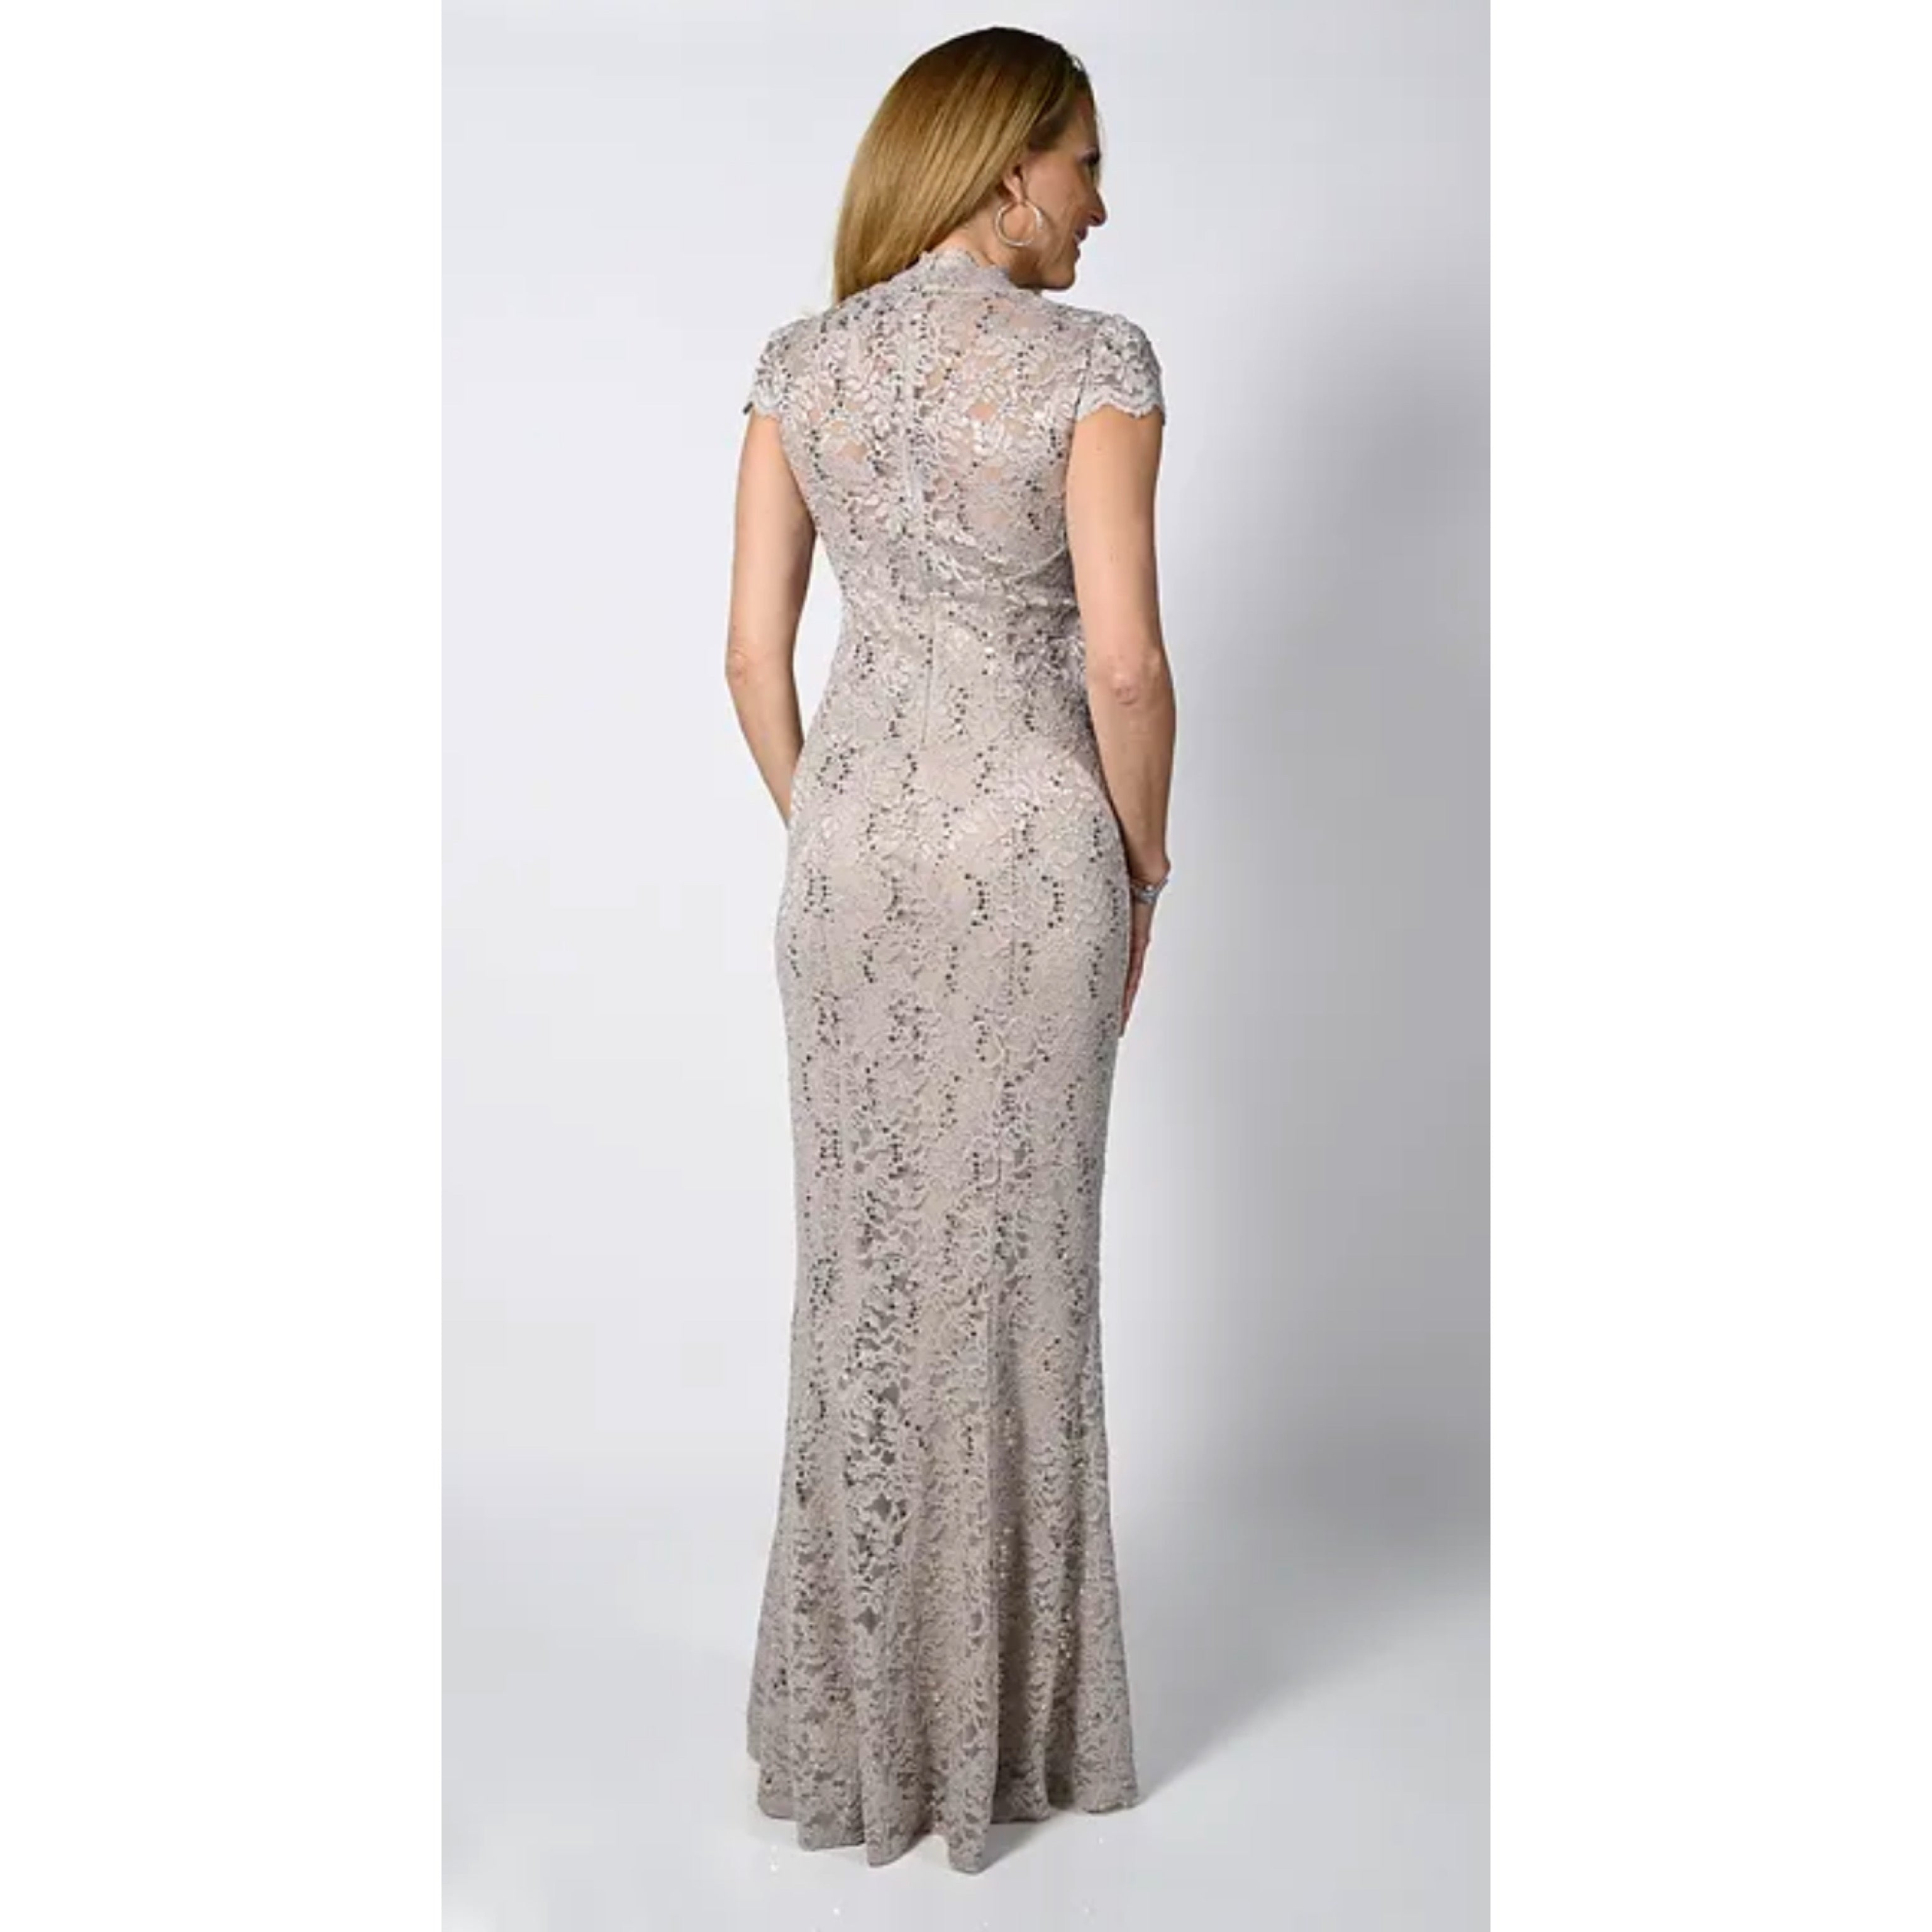 Frank Lyman champagne lace dress, size 6 & 14, NEW WITH TAGS!